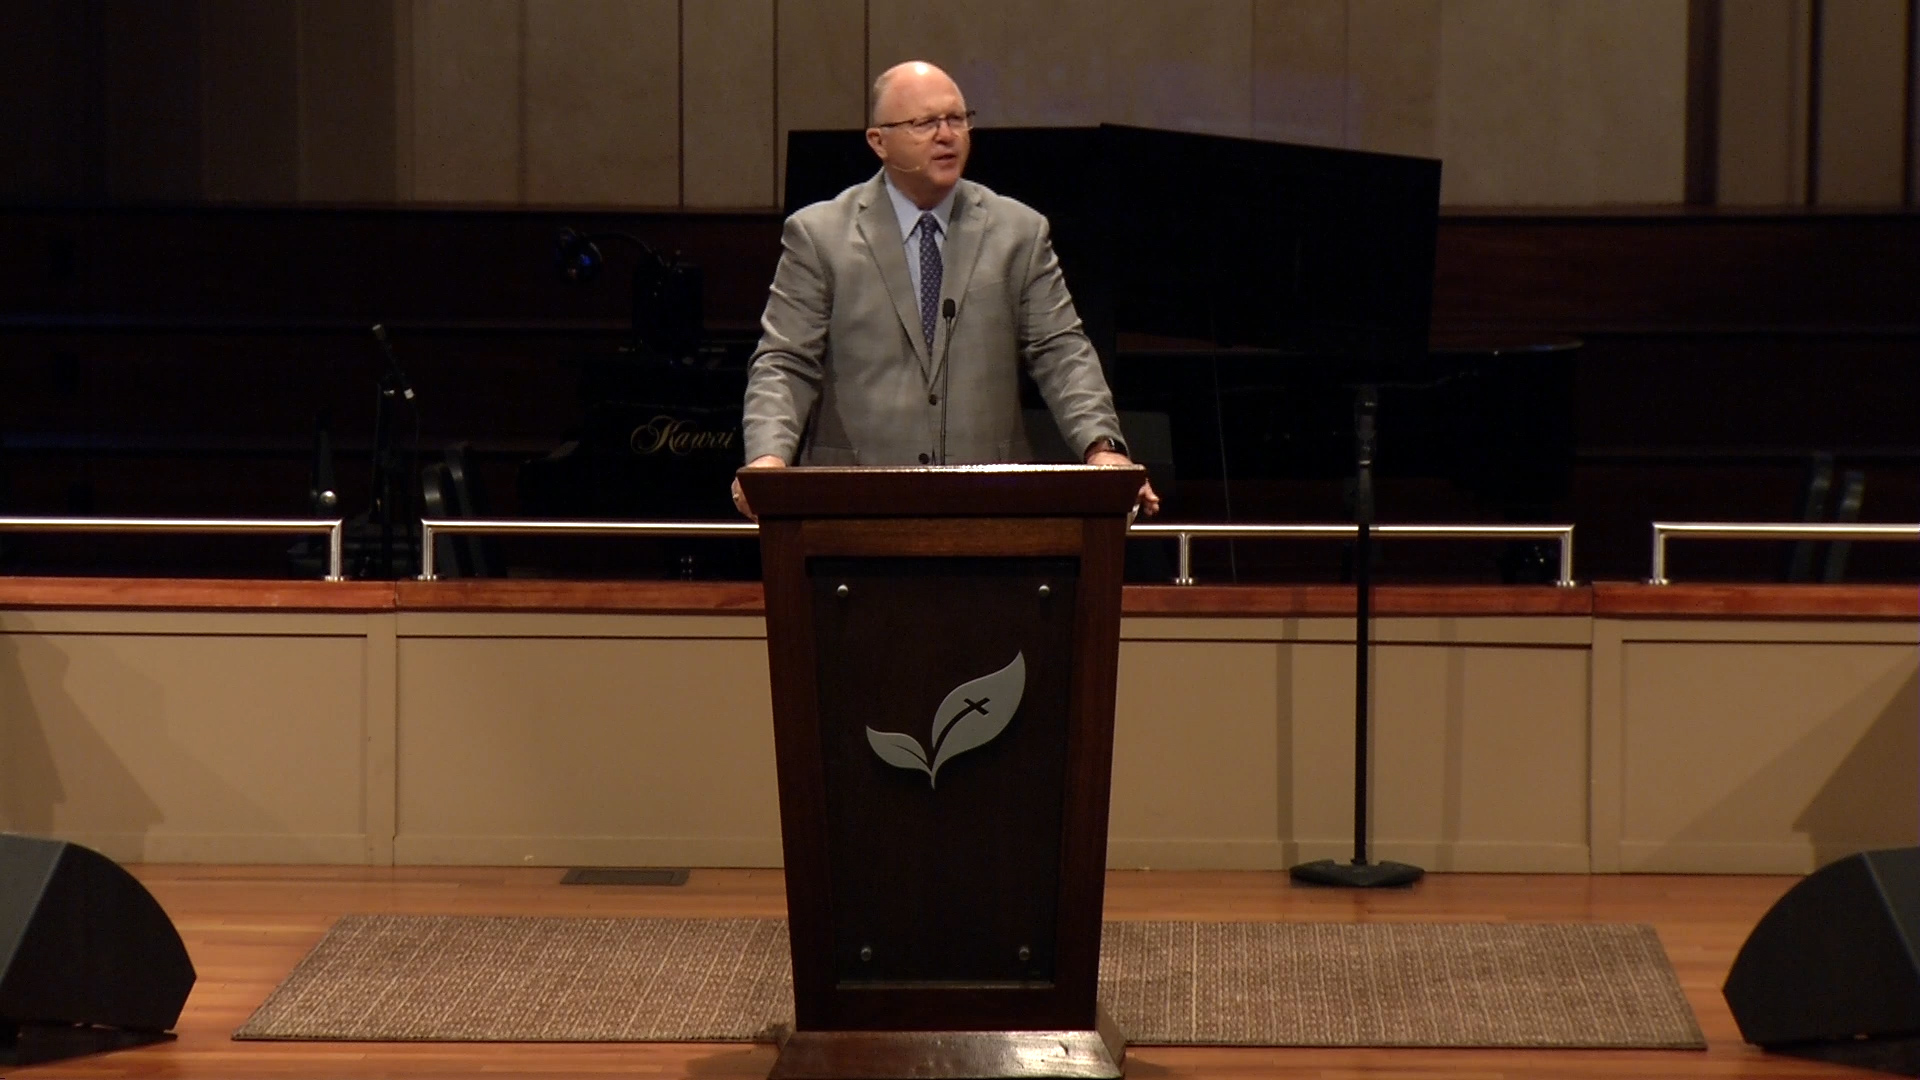 Pastor Paul Chappell: A Journey of Anticipation